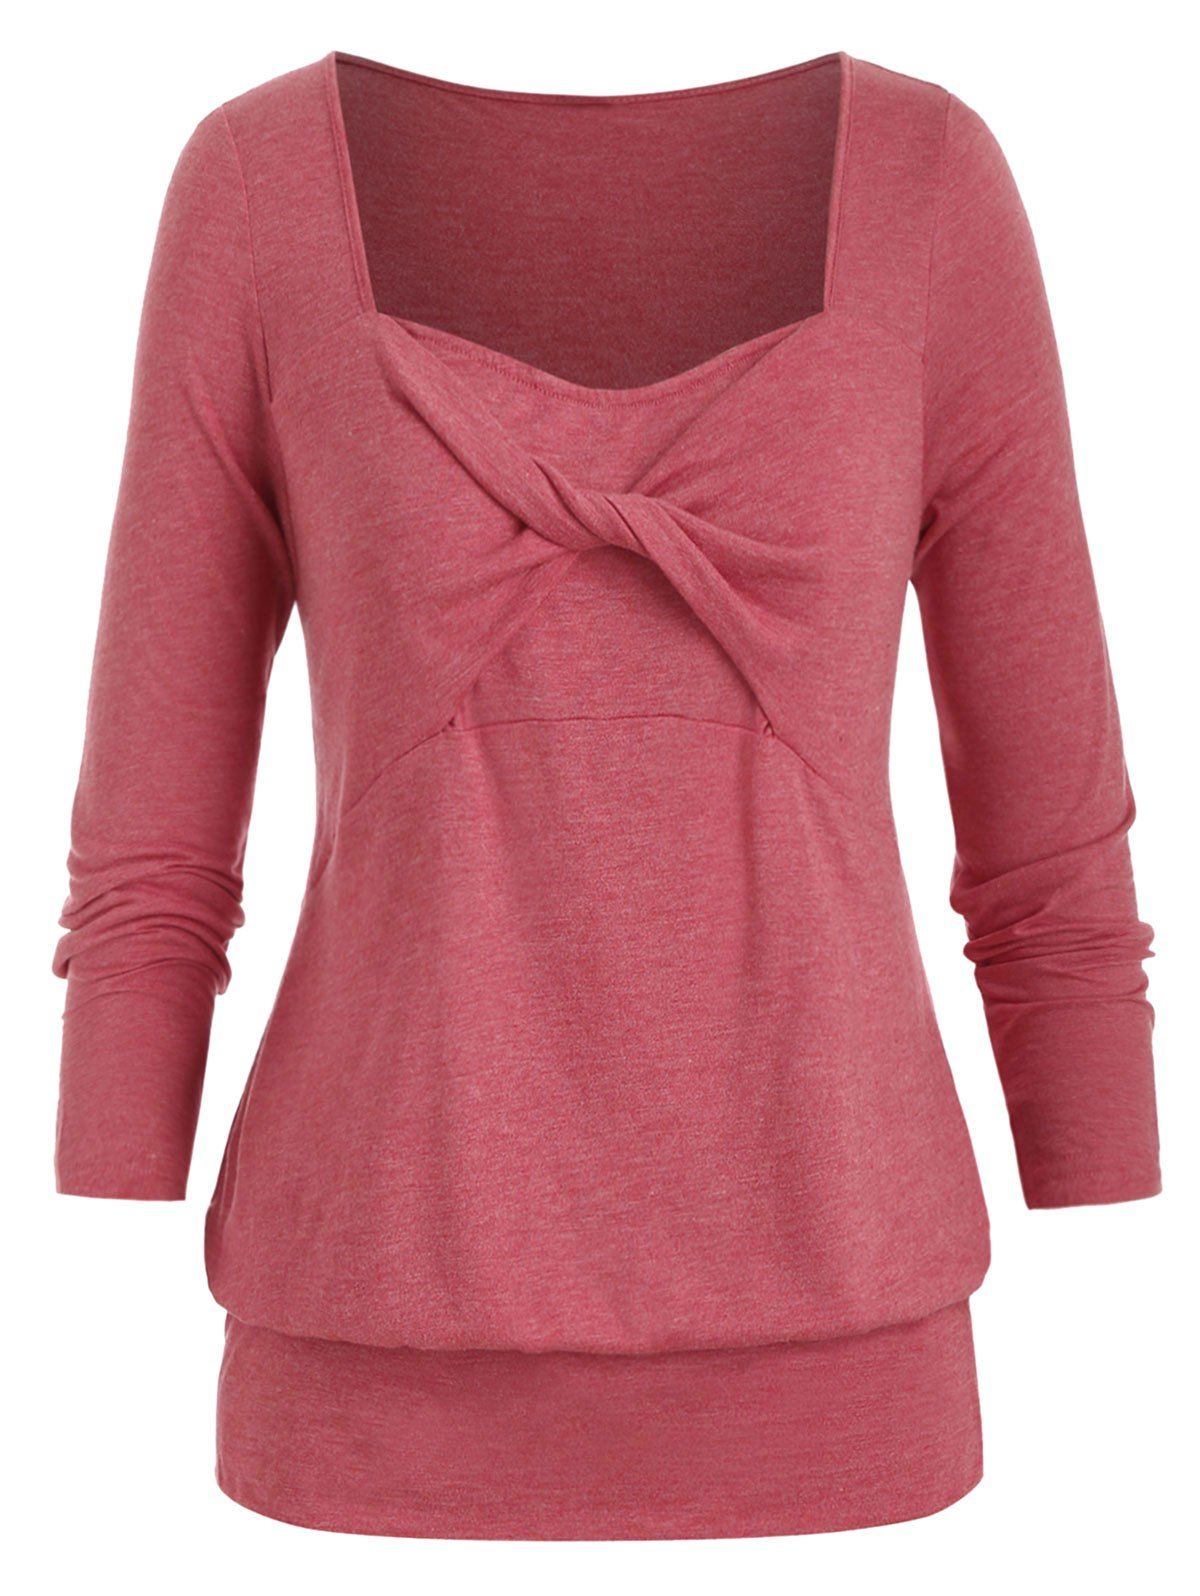 Plus Size Twist Square Neck Long Sleeve Tee - VALENTINE RED 5X